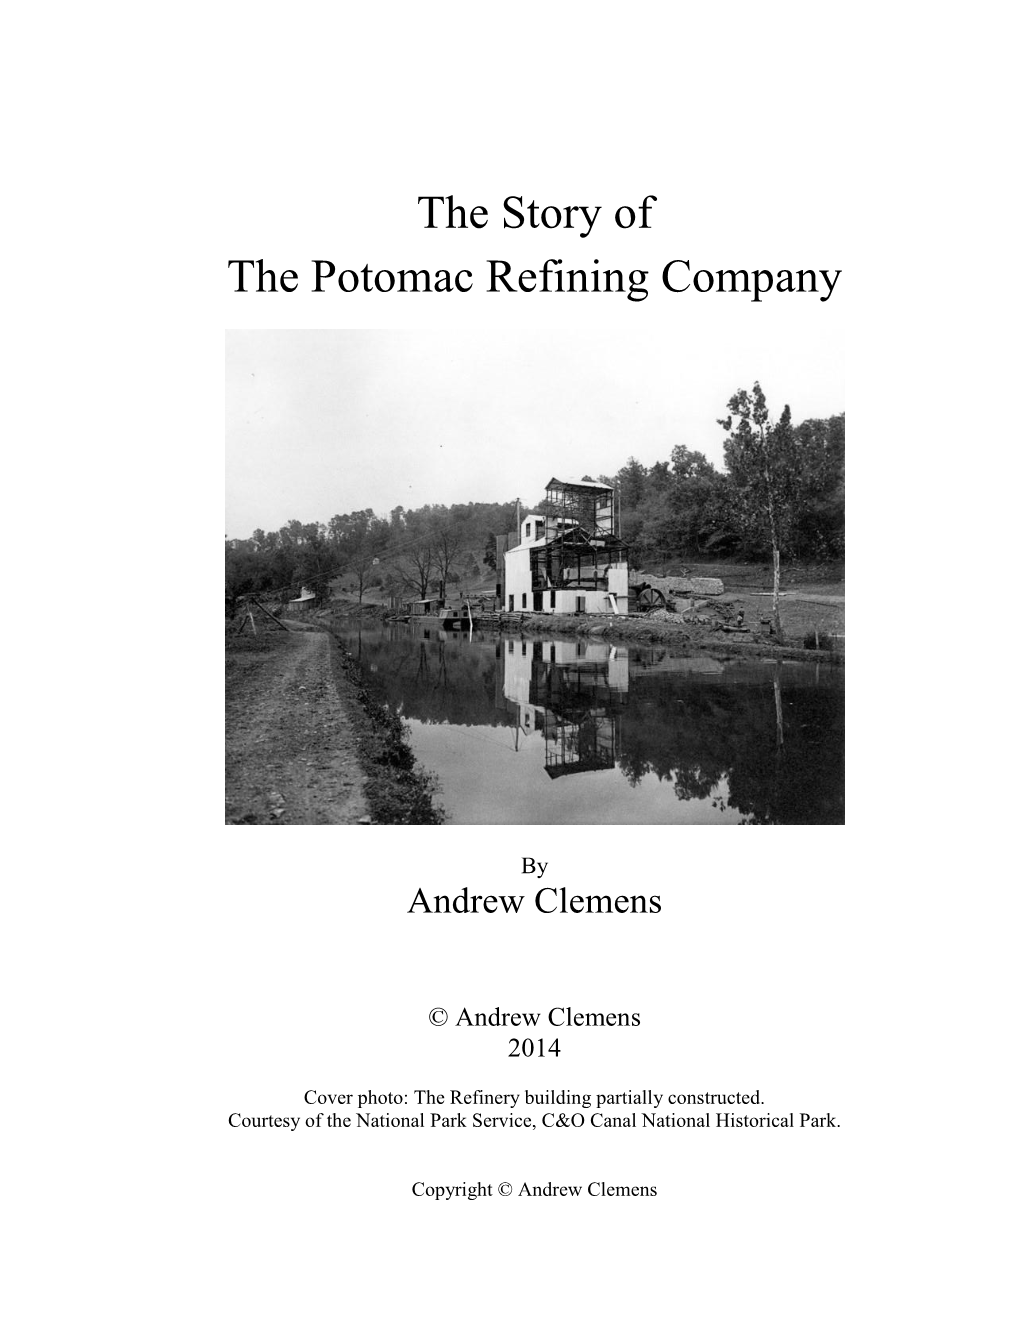 The Story of the Potomac Refining Company